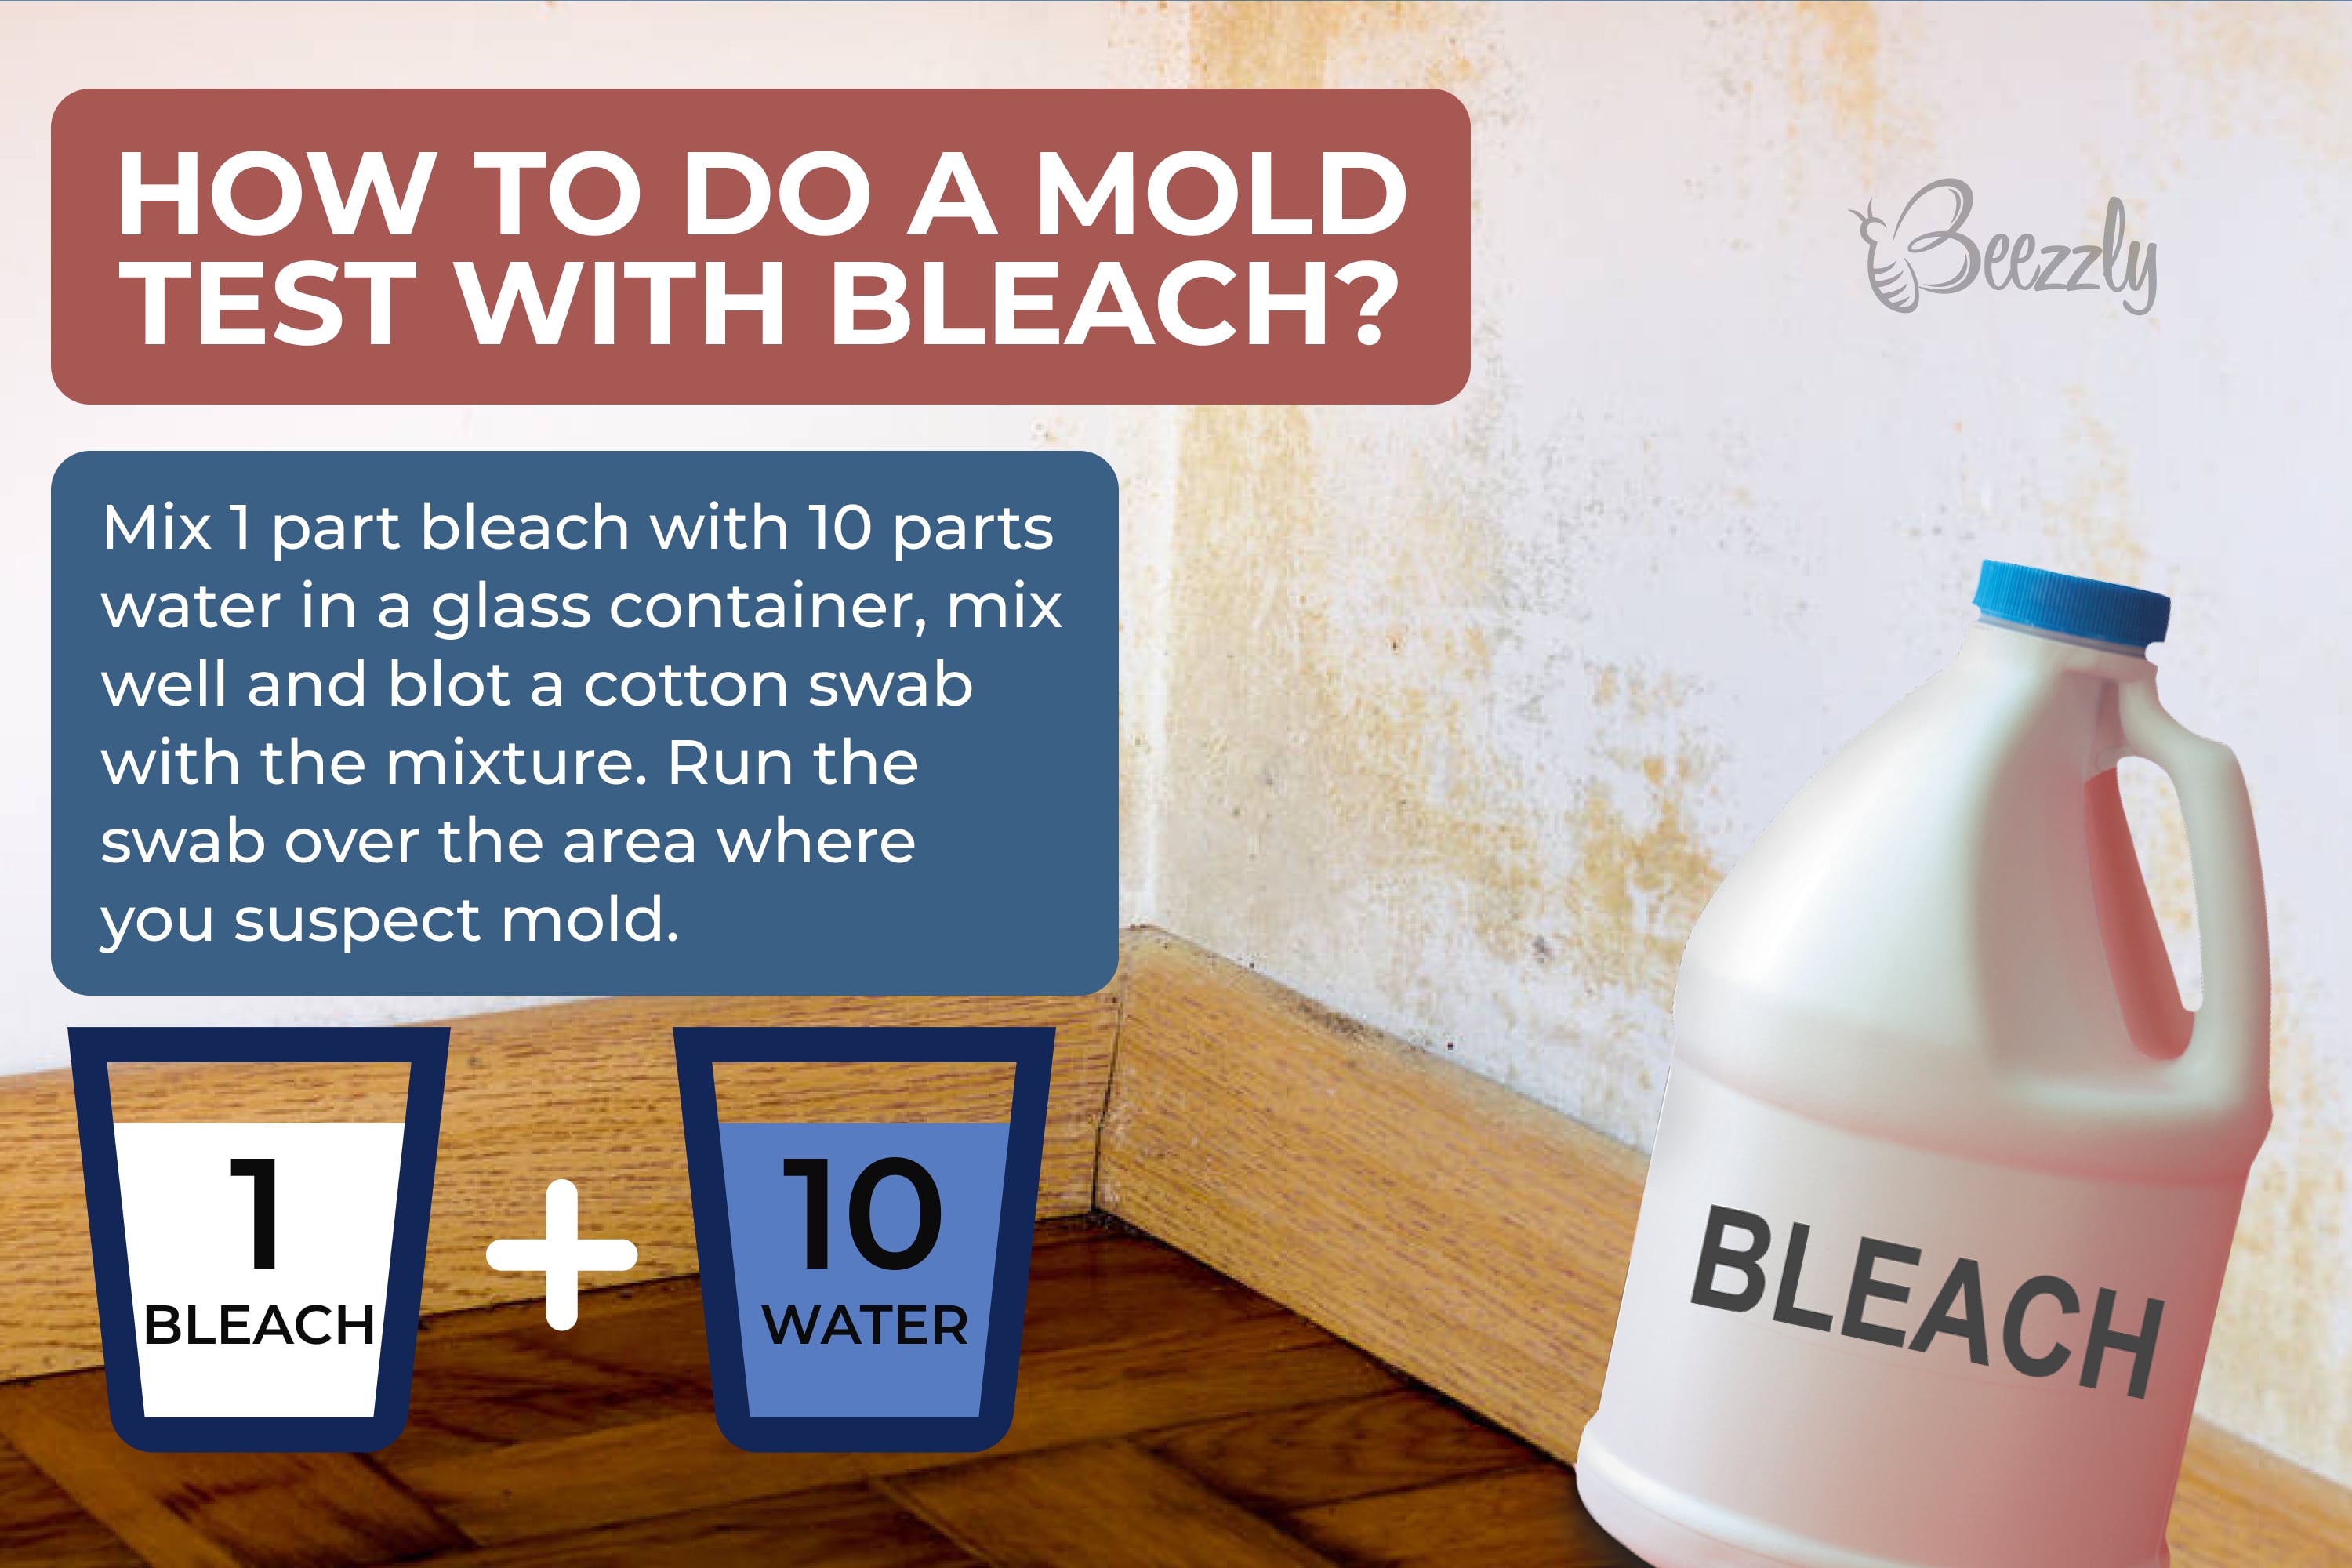 How to do a mold test with bleach